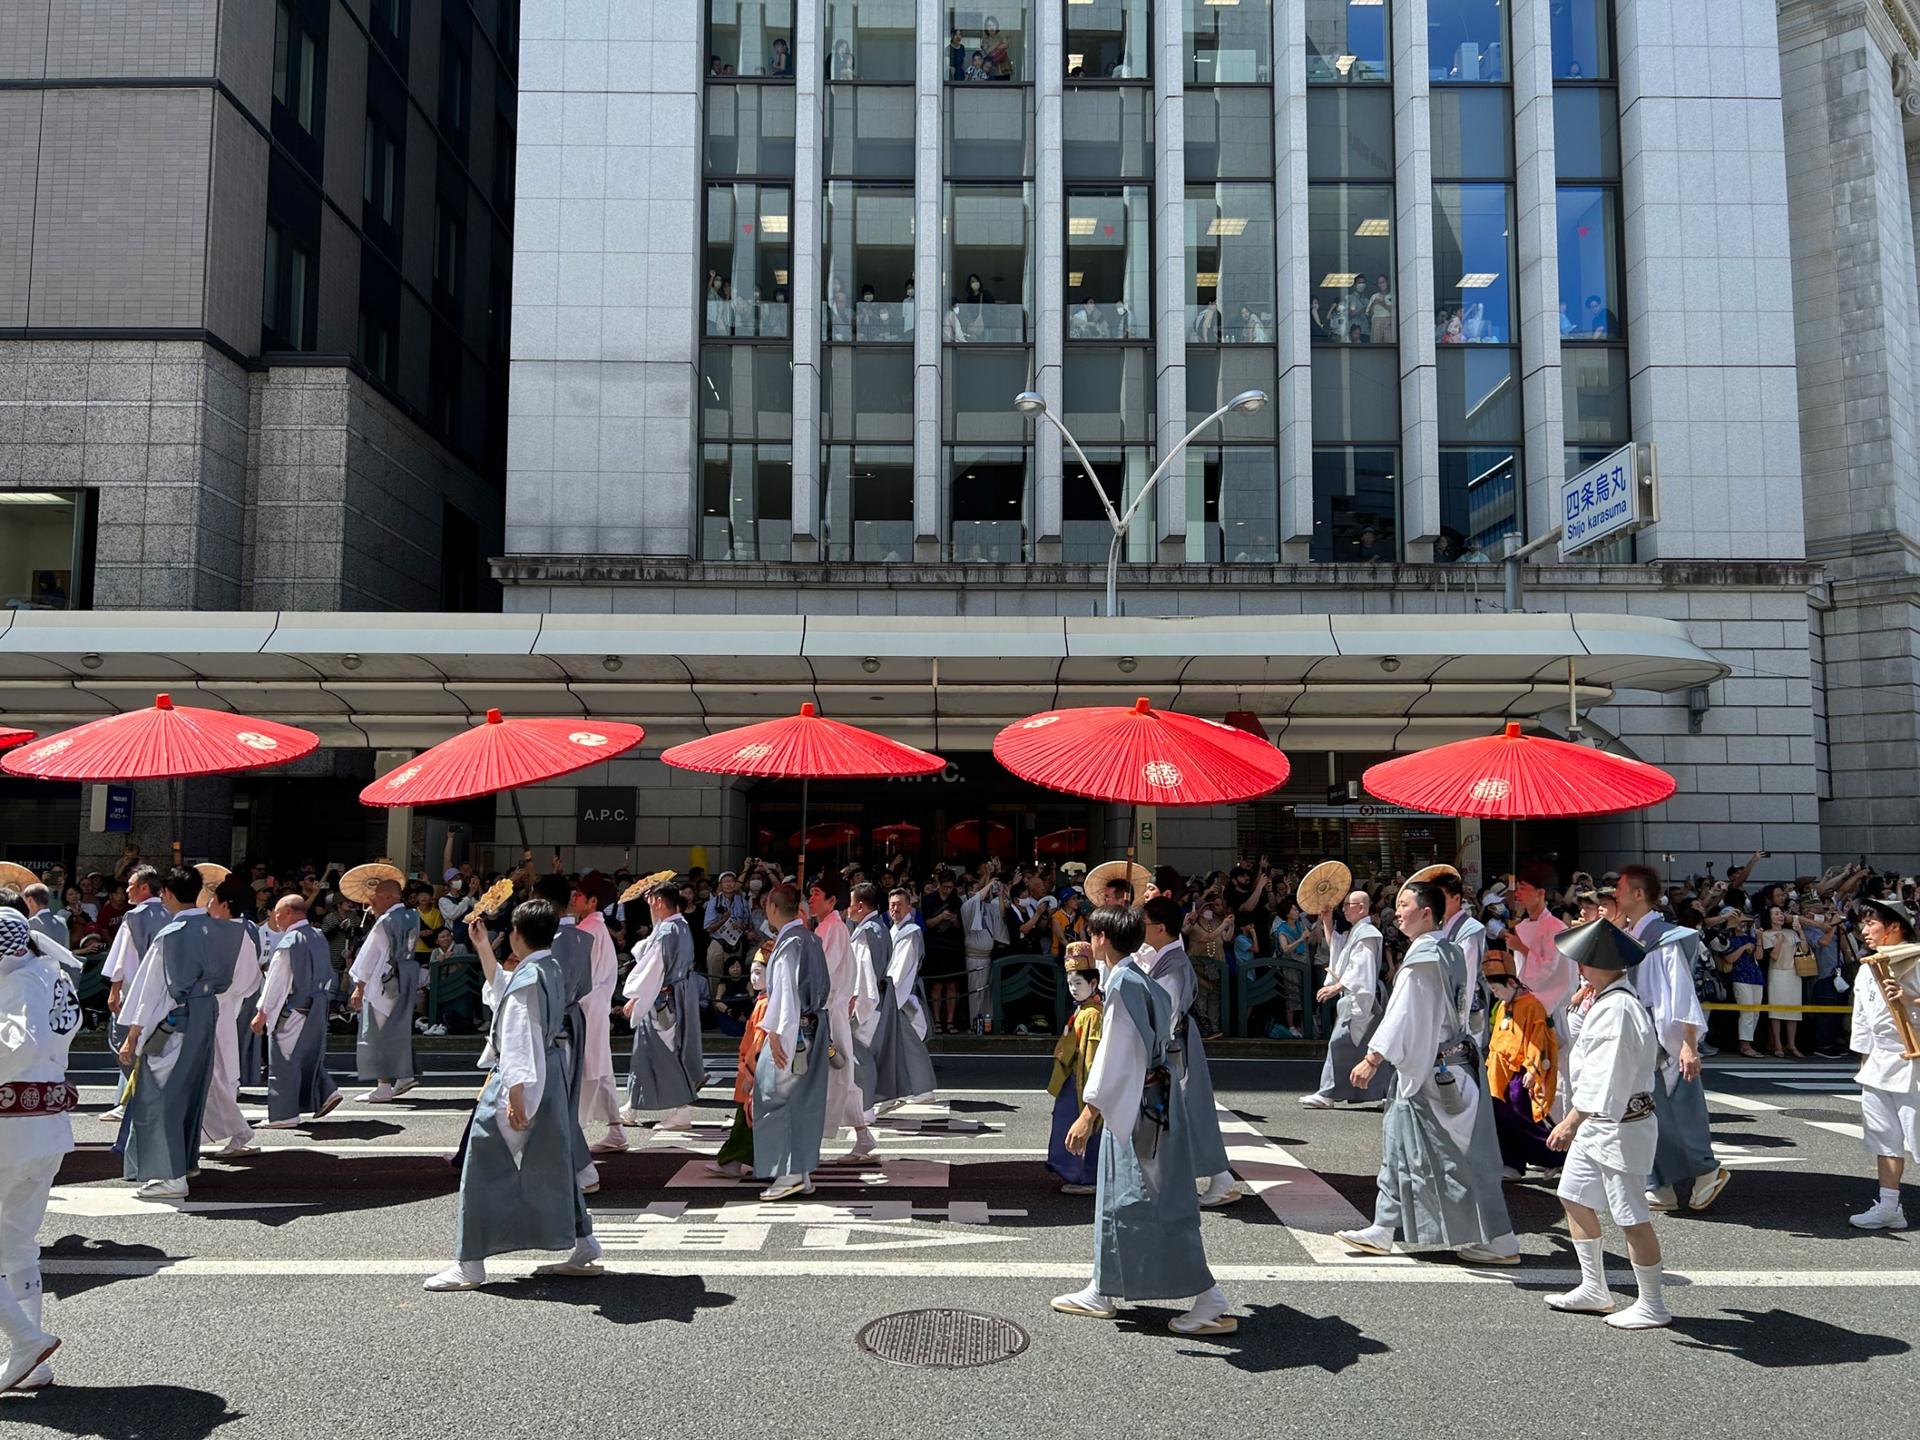 The procession was held on an extremely scorching hot day, so the men dressed in period costumes often held red umbrellas or small straw discs to keep cool. 